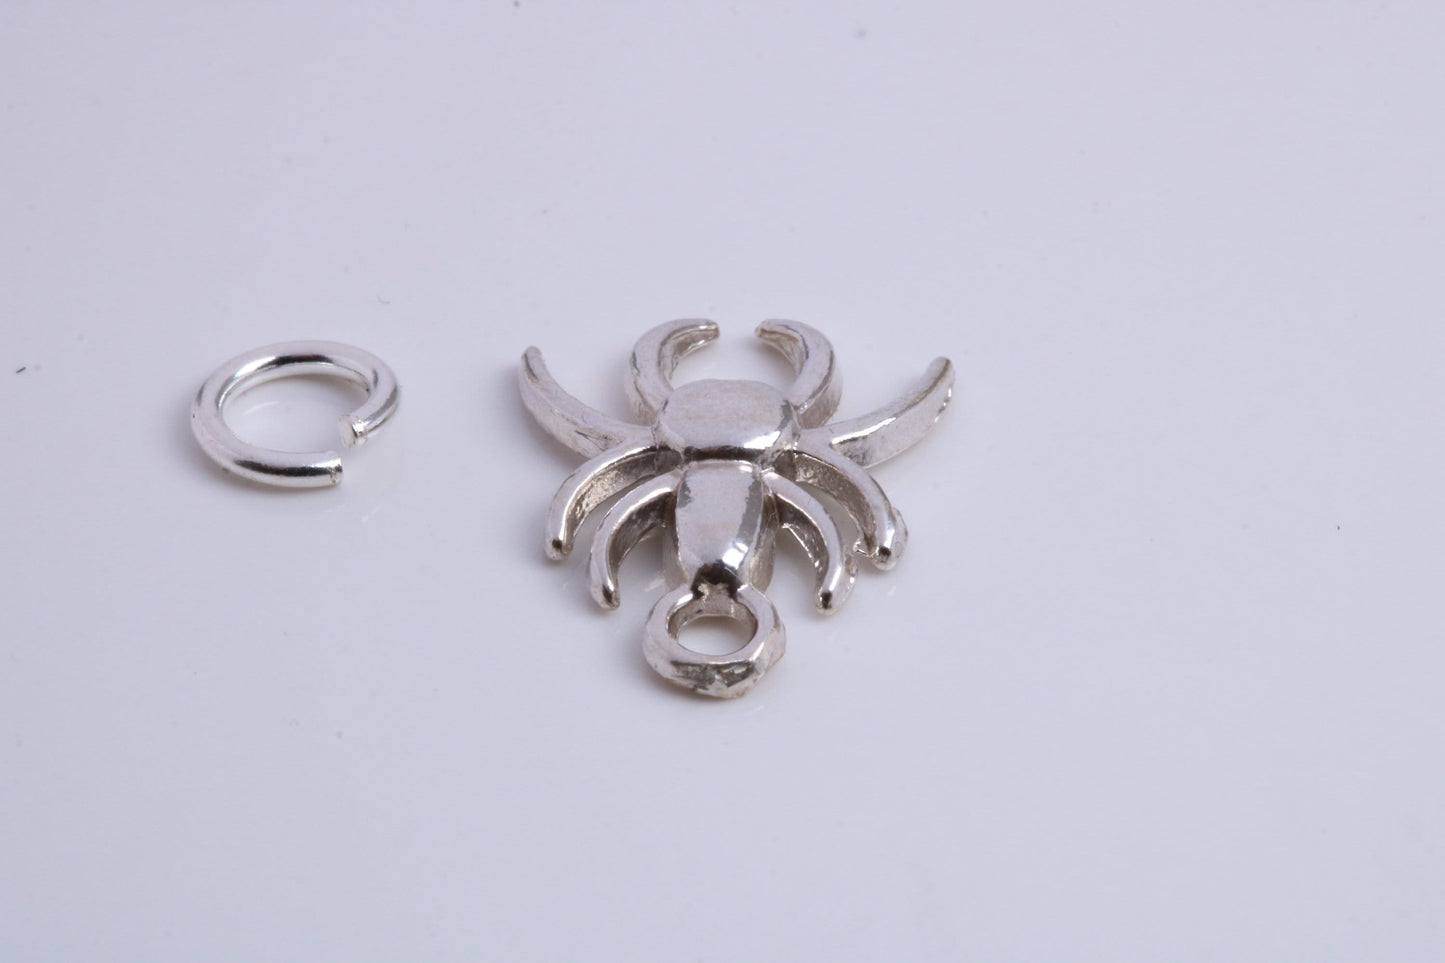 Spider Charm, Traditional Charm, Made from Solid 925 Grade Sterling Silver, Complete with Attachment Link